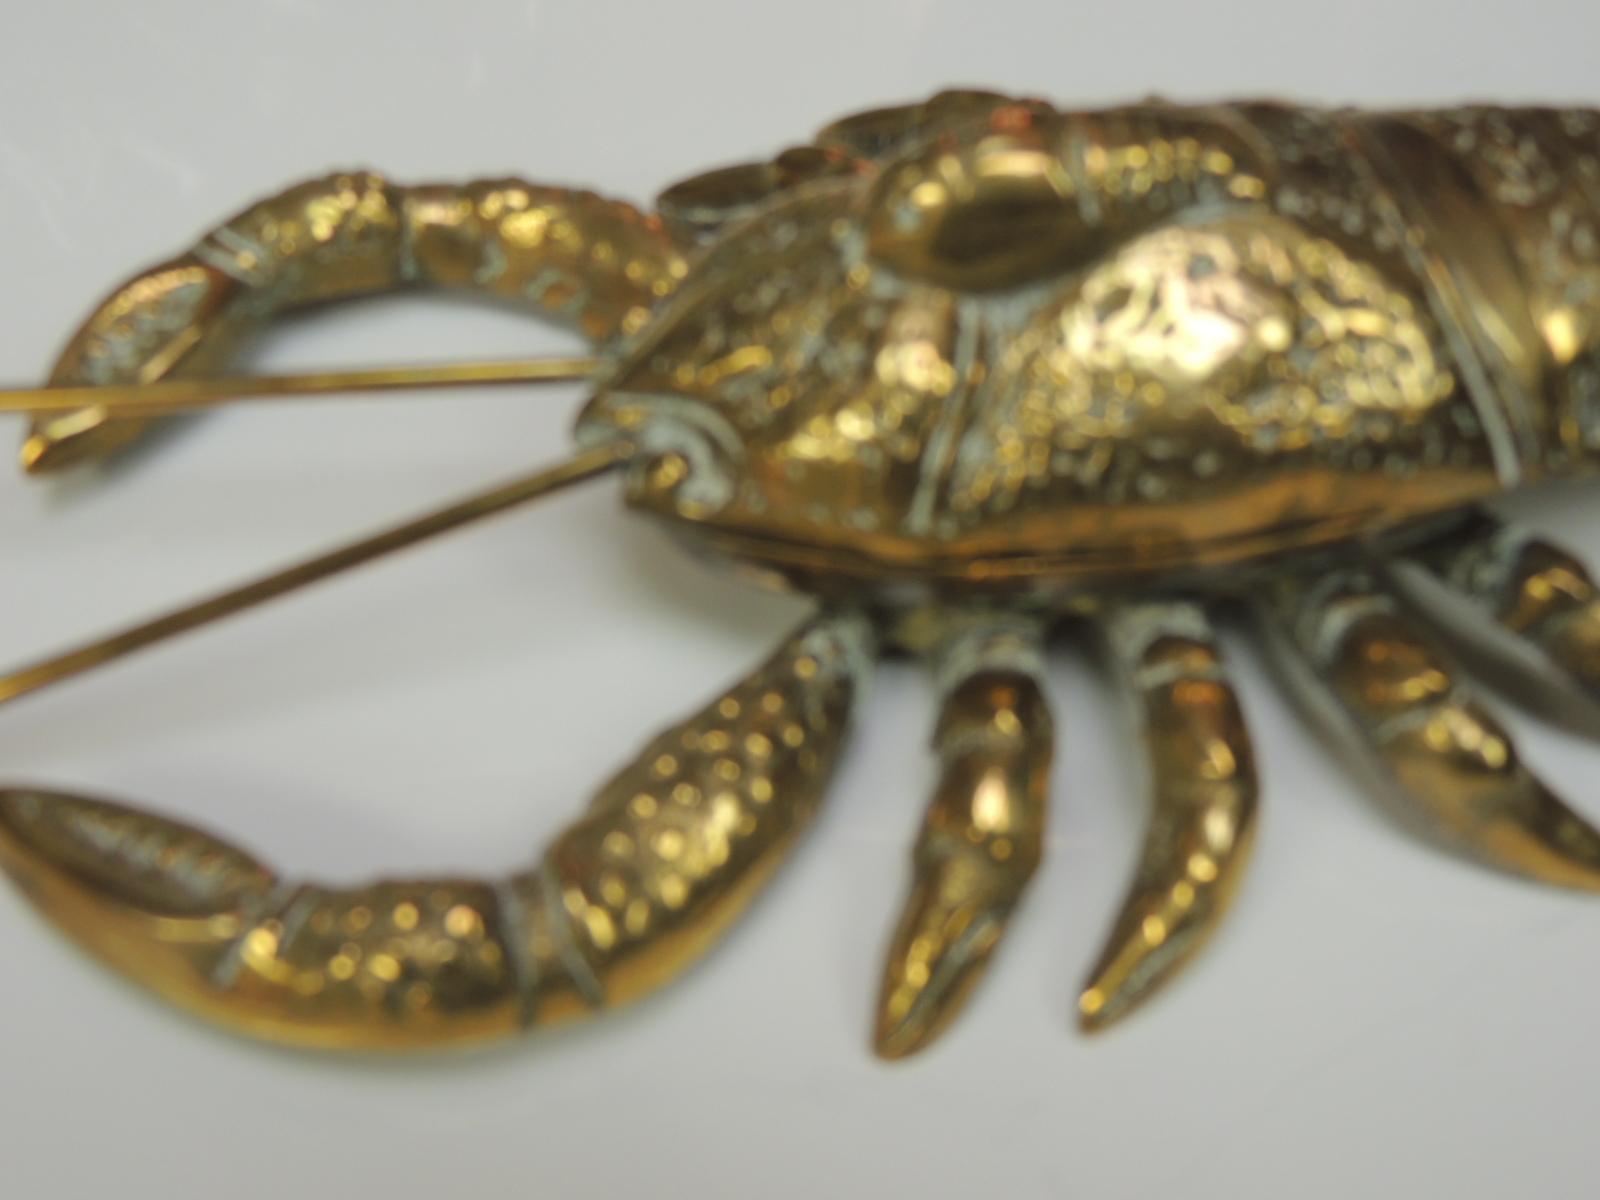 Vintage articulated brass lobster box.
Vintage detailed brass box of a lobster figurine, the front top opens to reveal the box.
India, 1970s.
Measures: 10